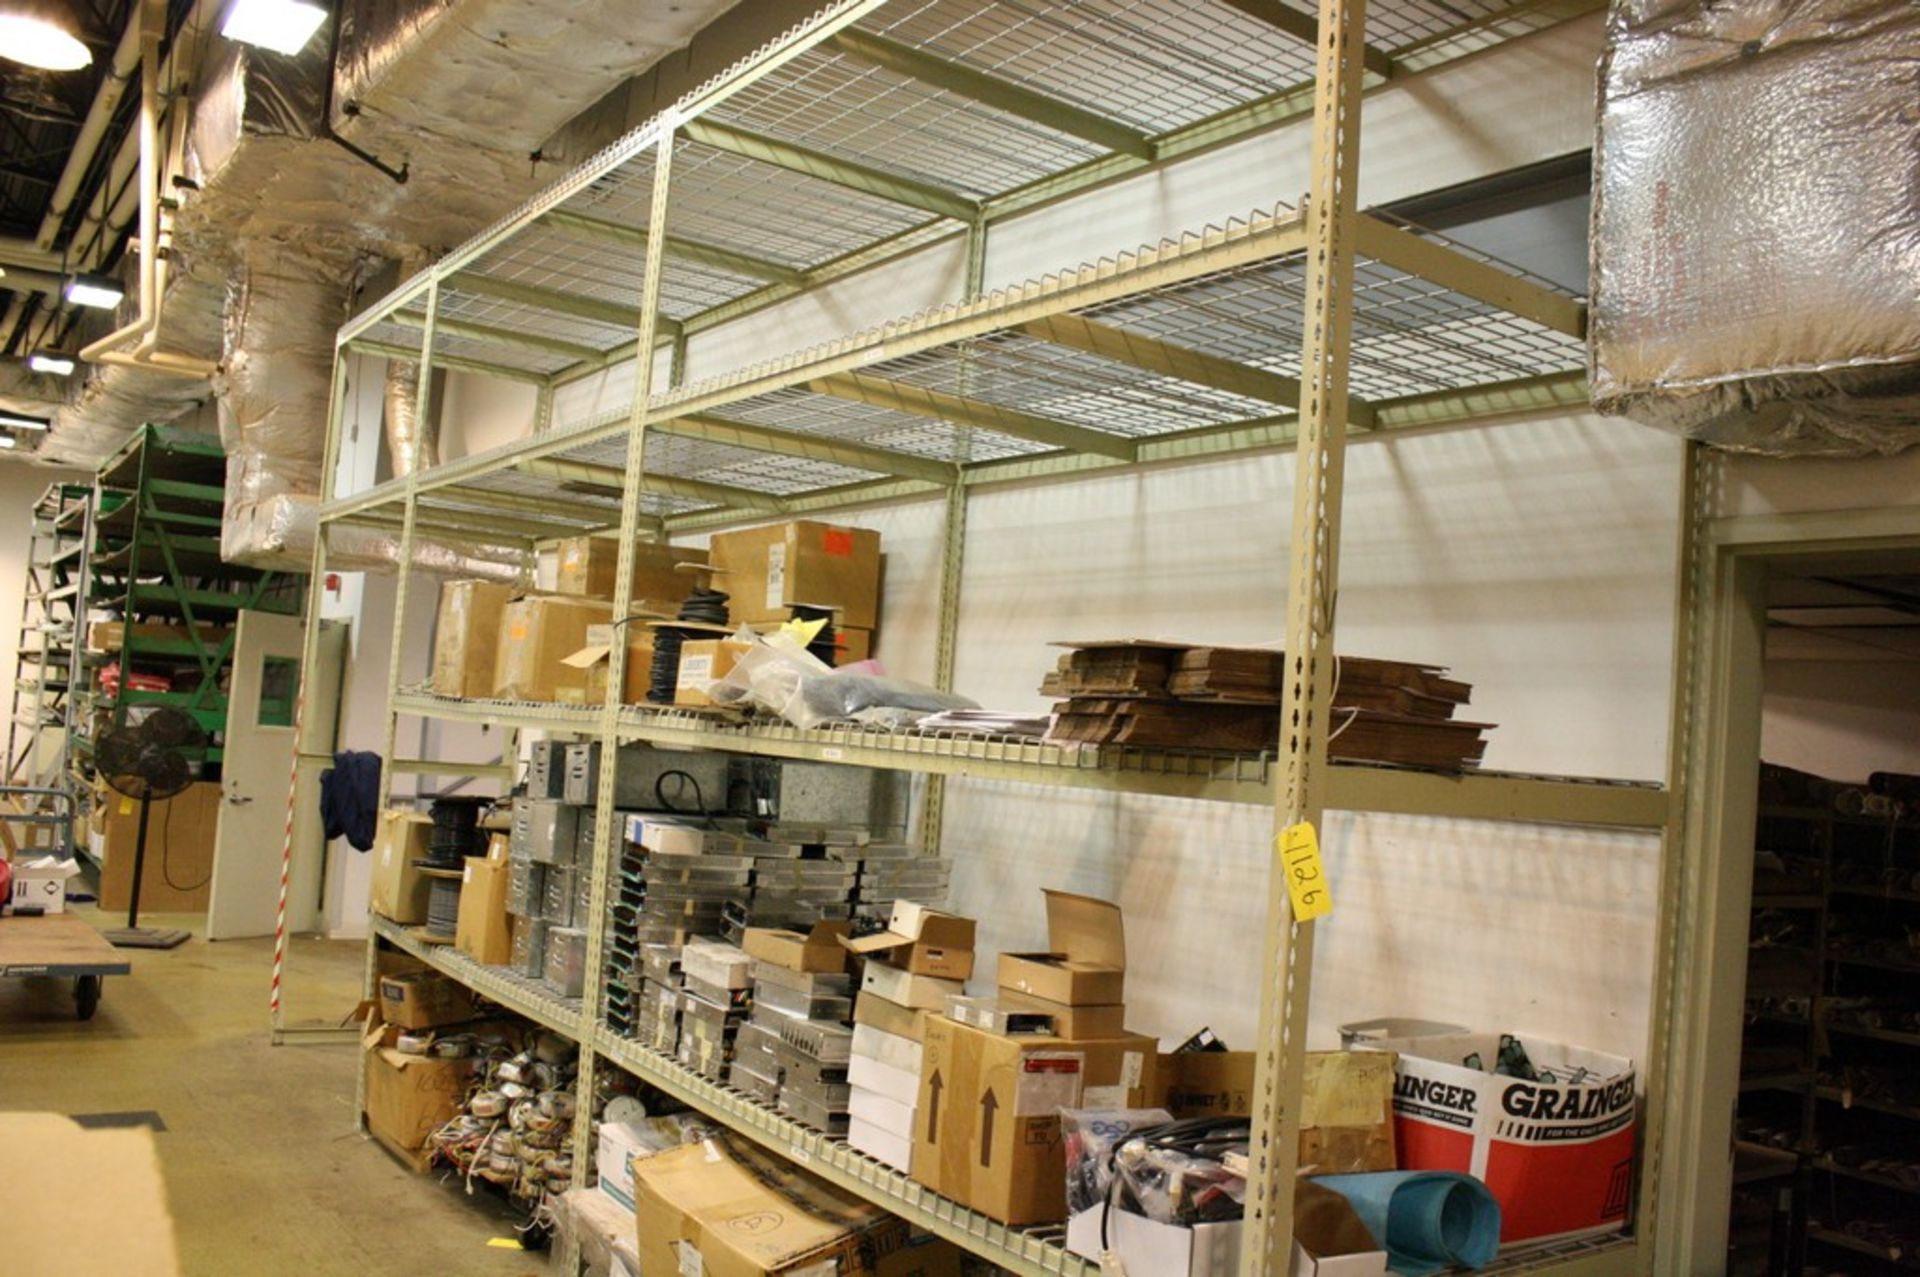 SECTIONS OF LIGHT DUTY PALLET RACKING-11' X 42" X 8'